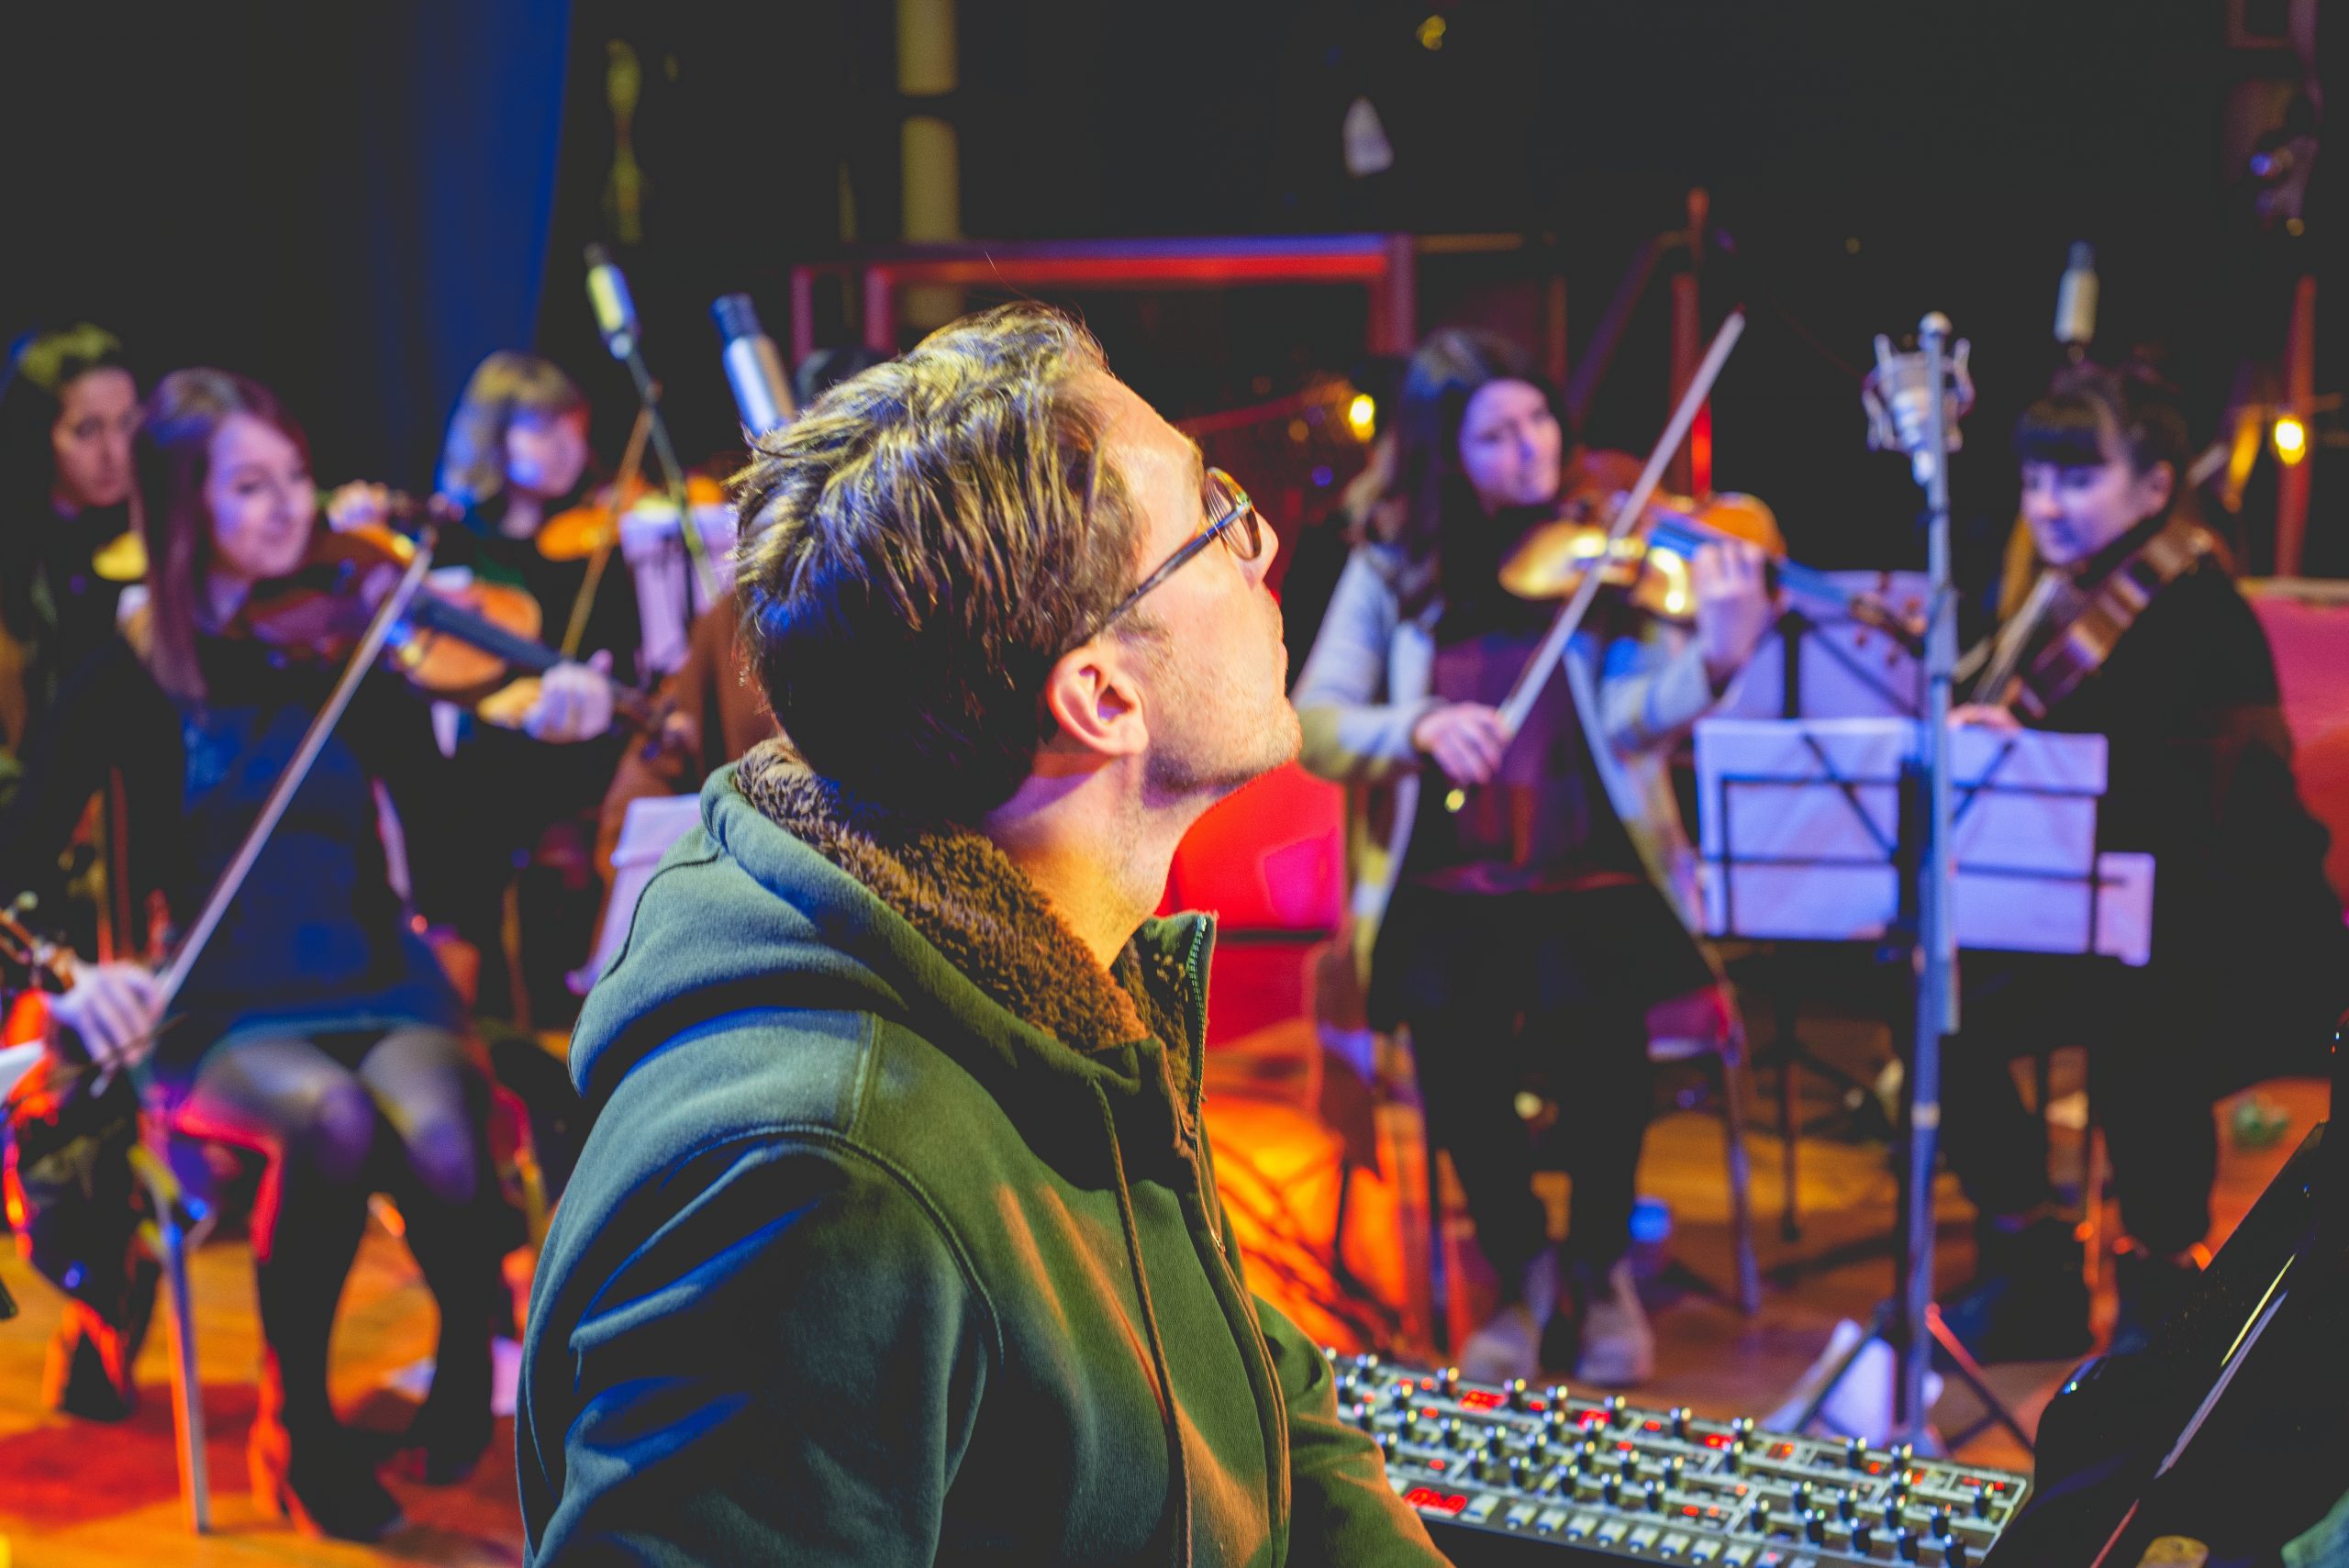 The Untold Orchestra: The Open Fund for Organisations